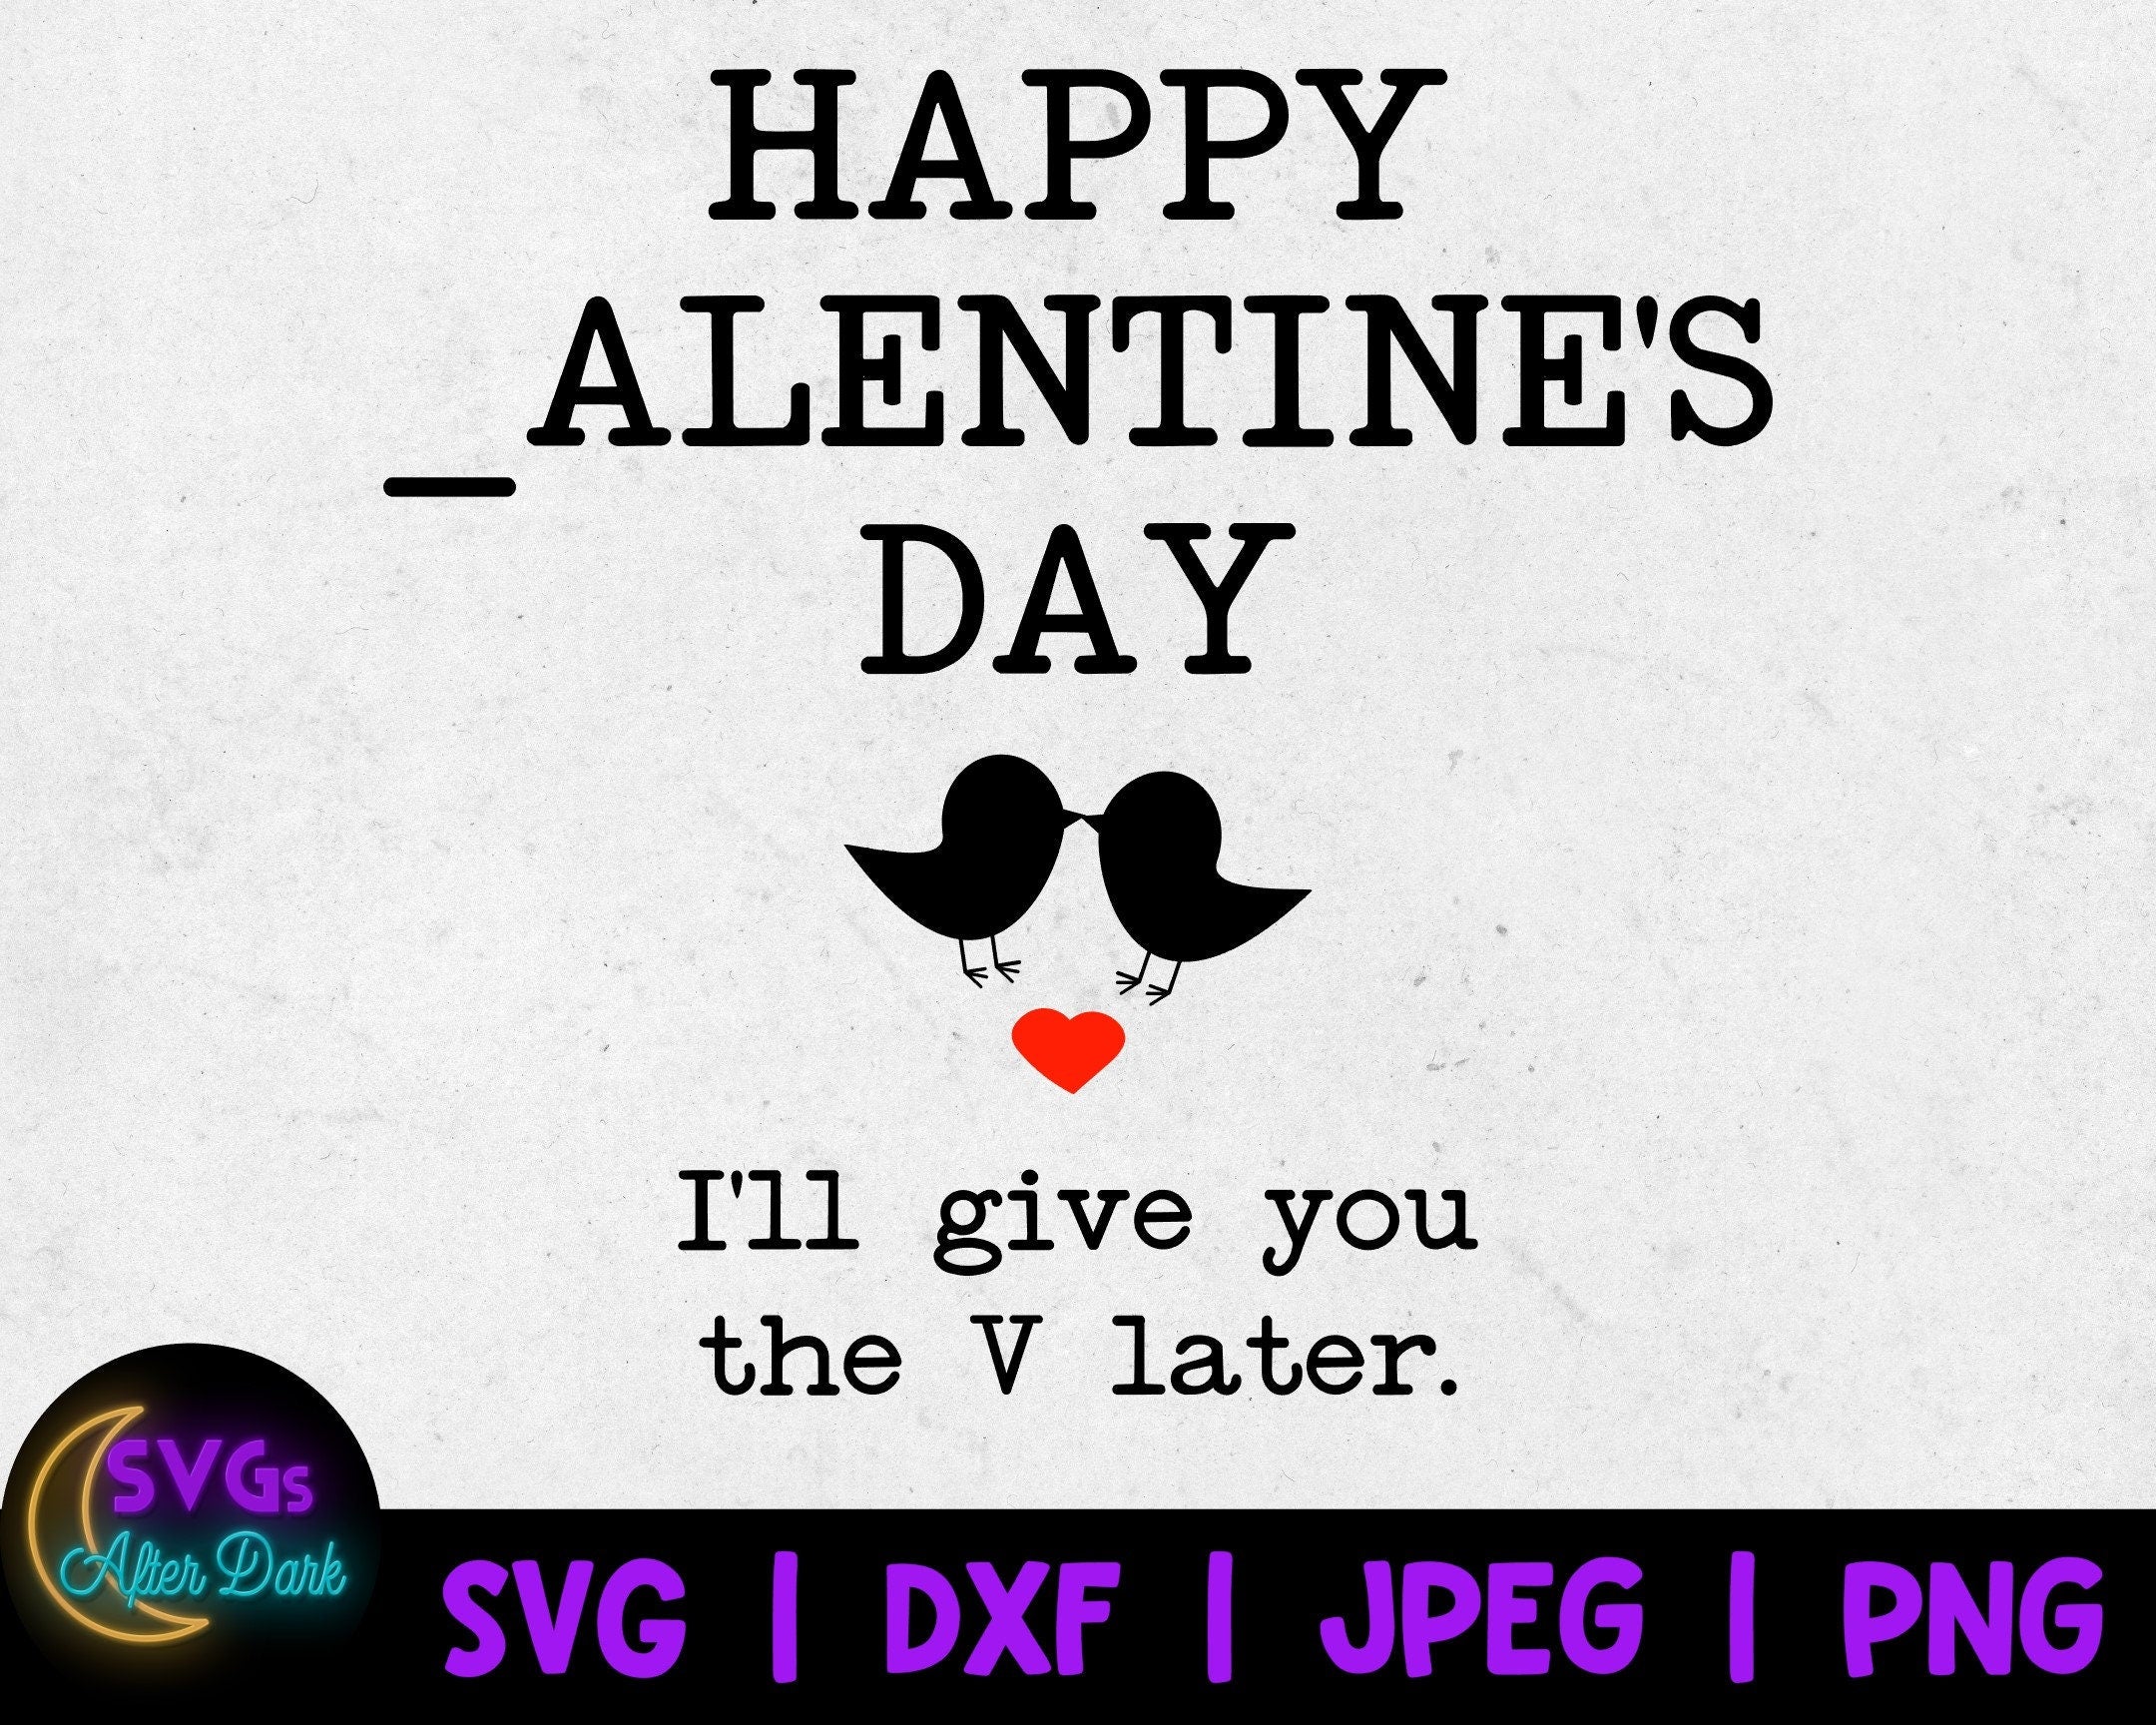 NSFW SVG - Happy Valentine's Day I'll Give you the V later SVG - Dirty Valentine's Day Svg